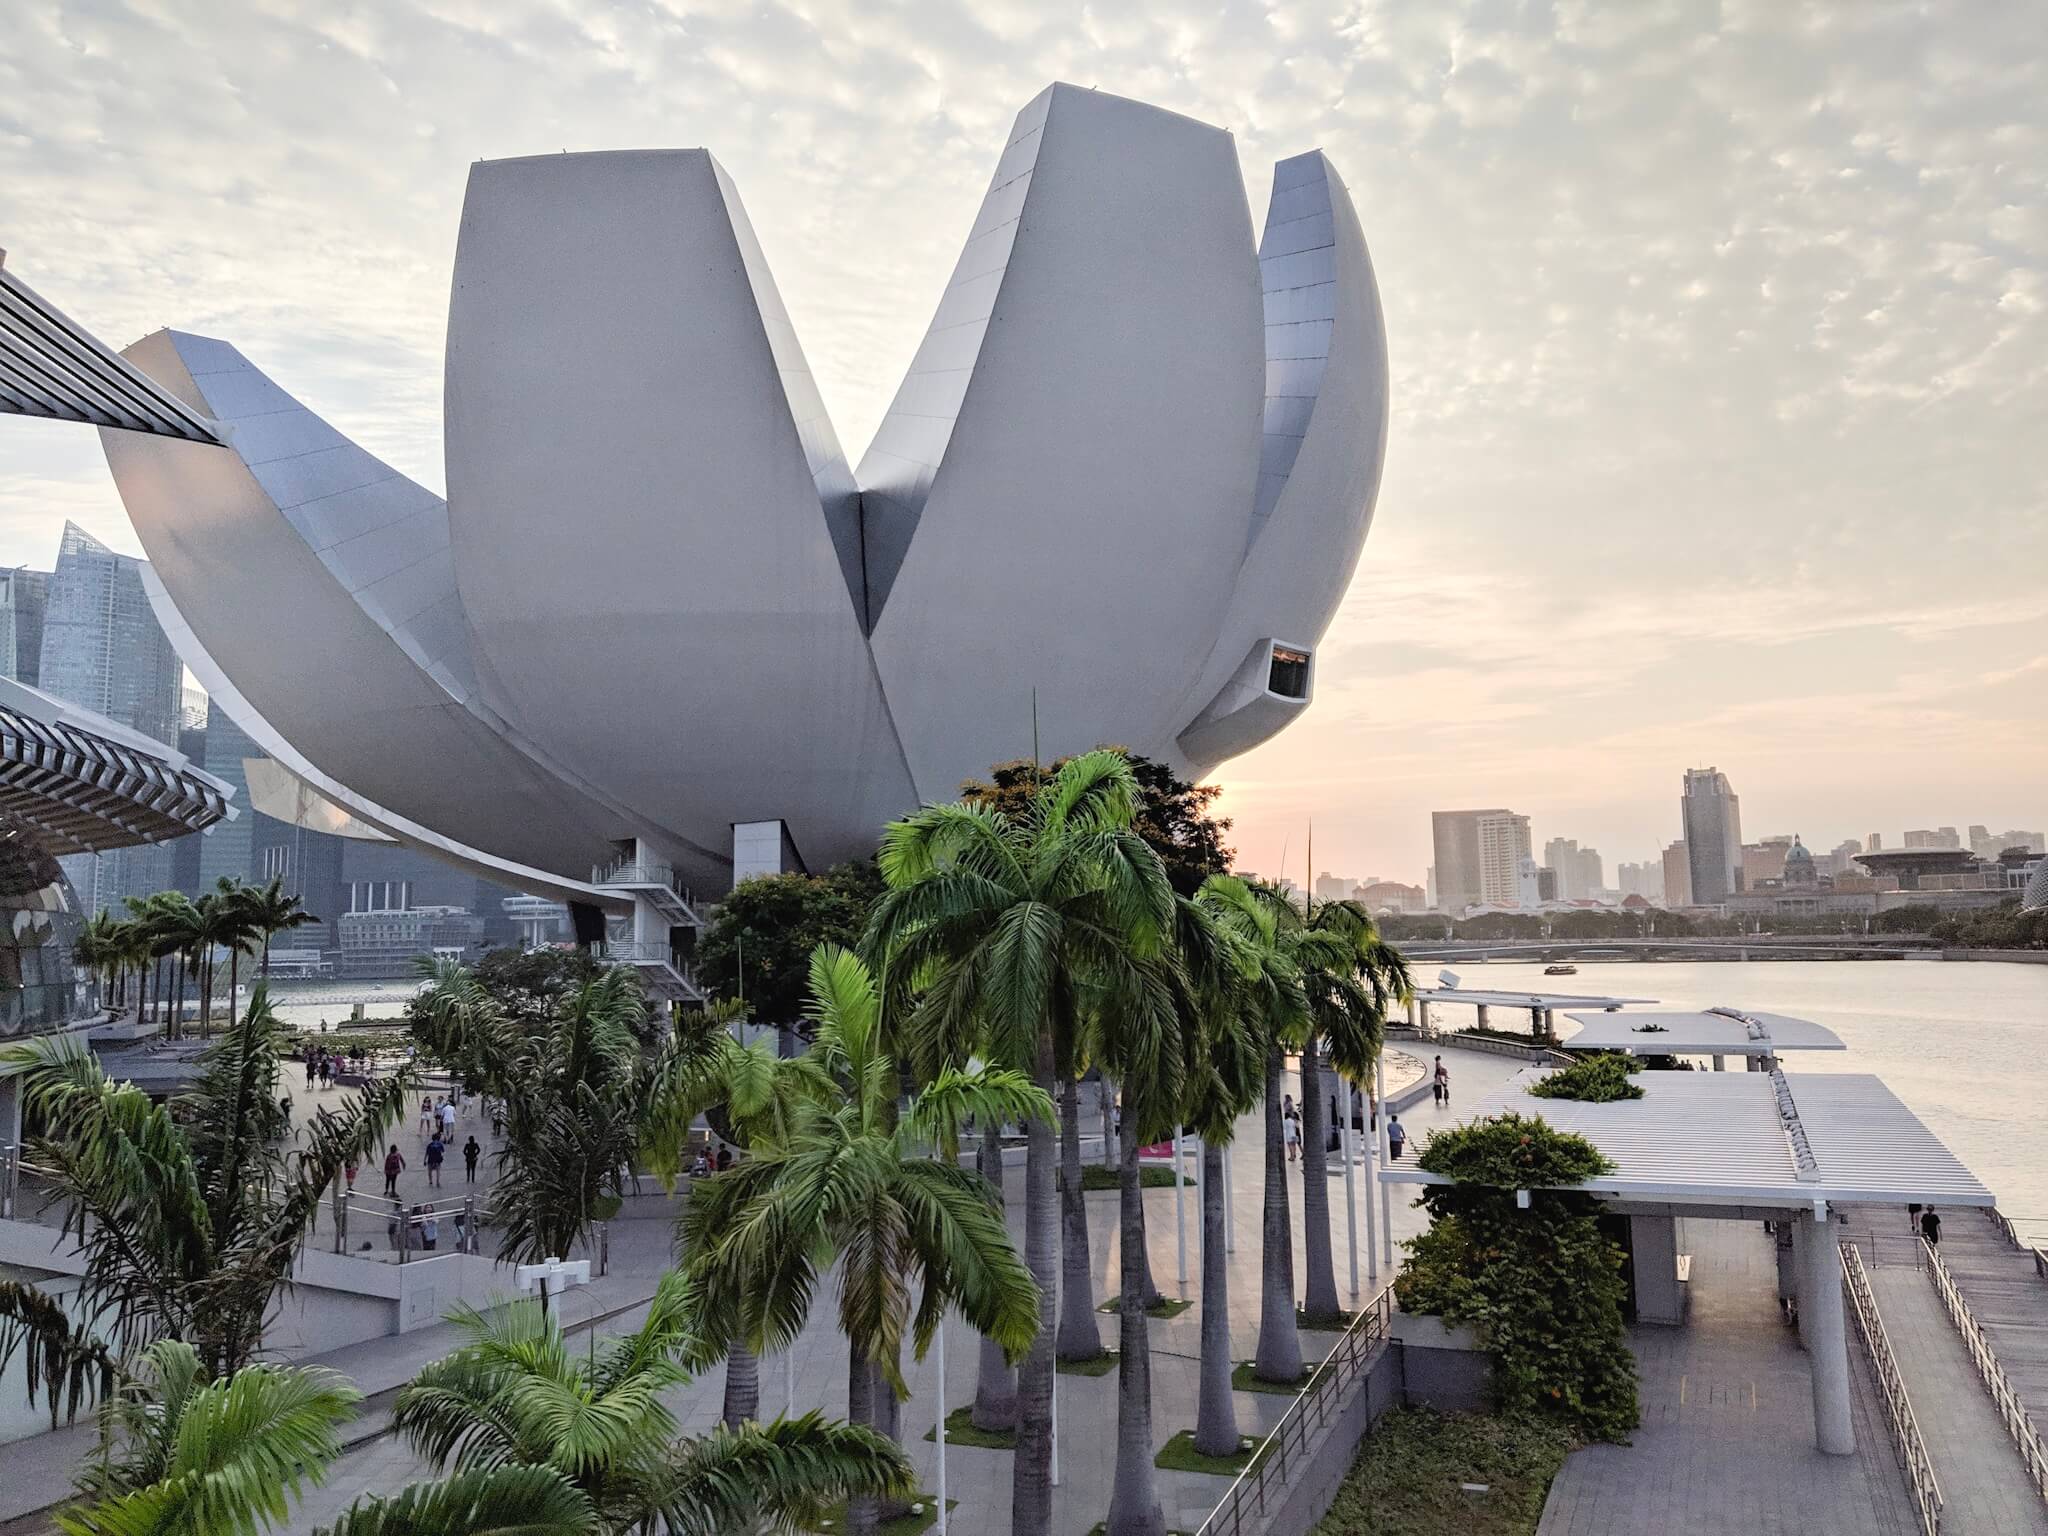 the outside of the art science museum building in singapore